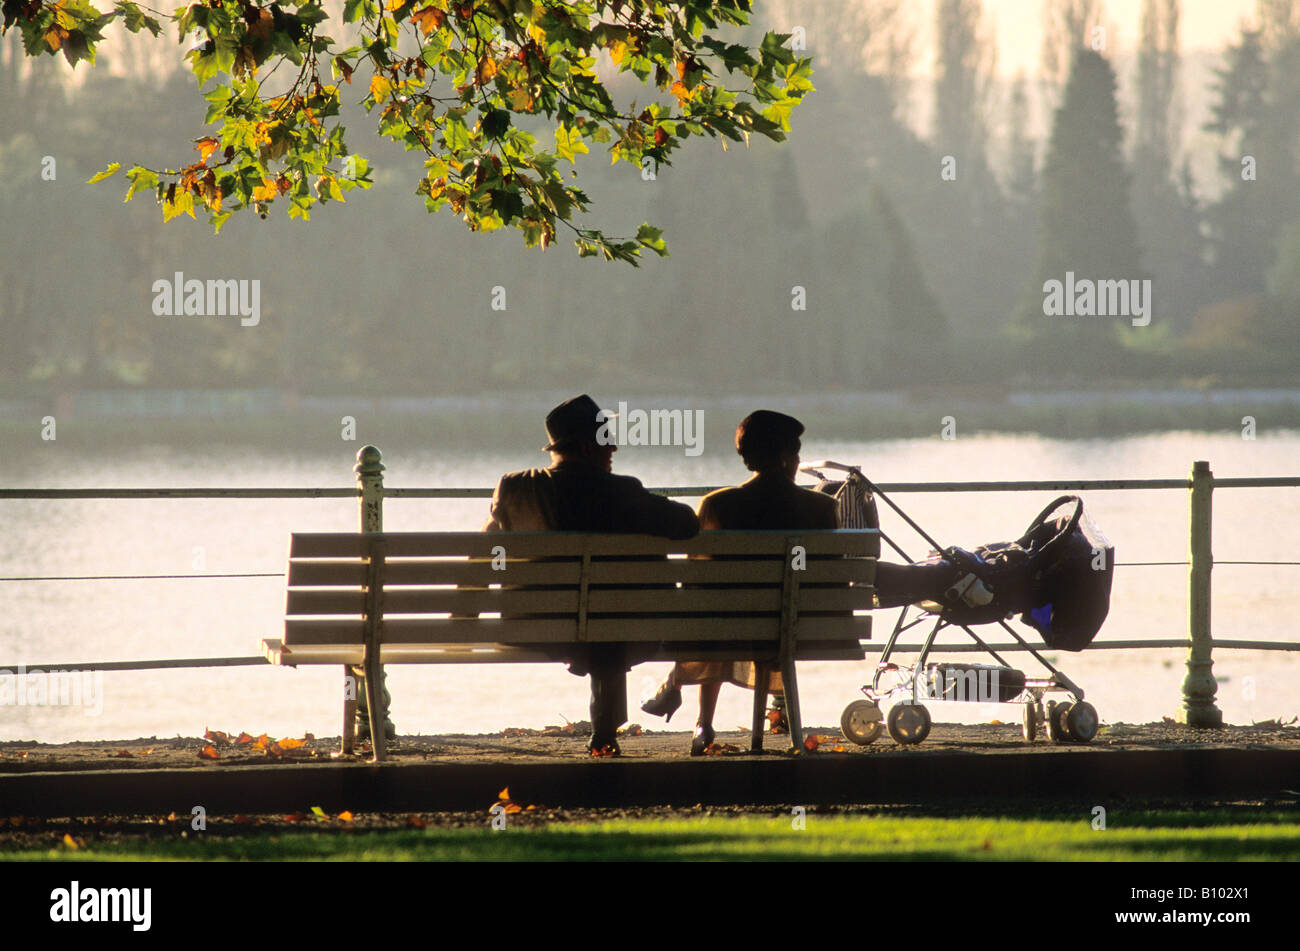 Grandparents resting on a park bench with their grandchild in a pram Stock Photo